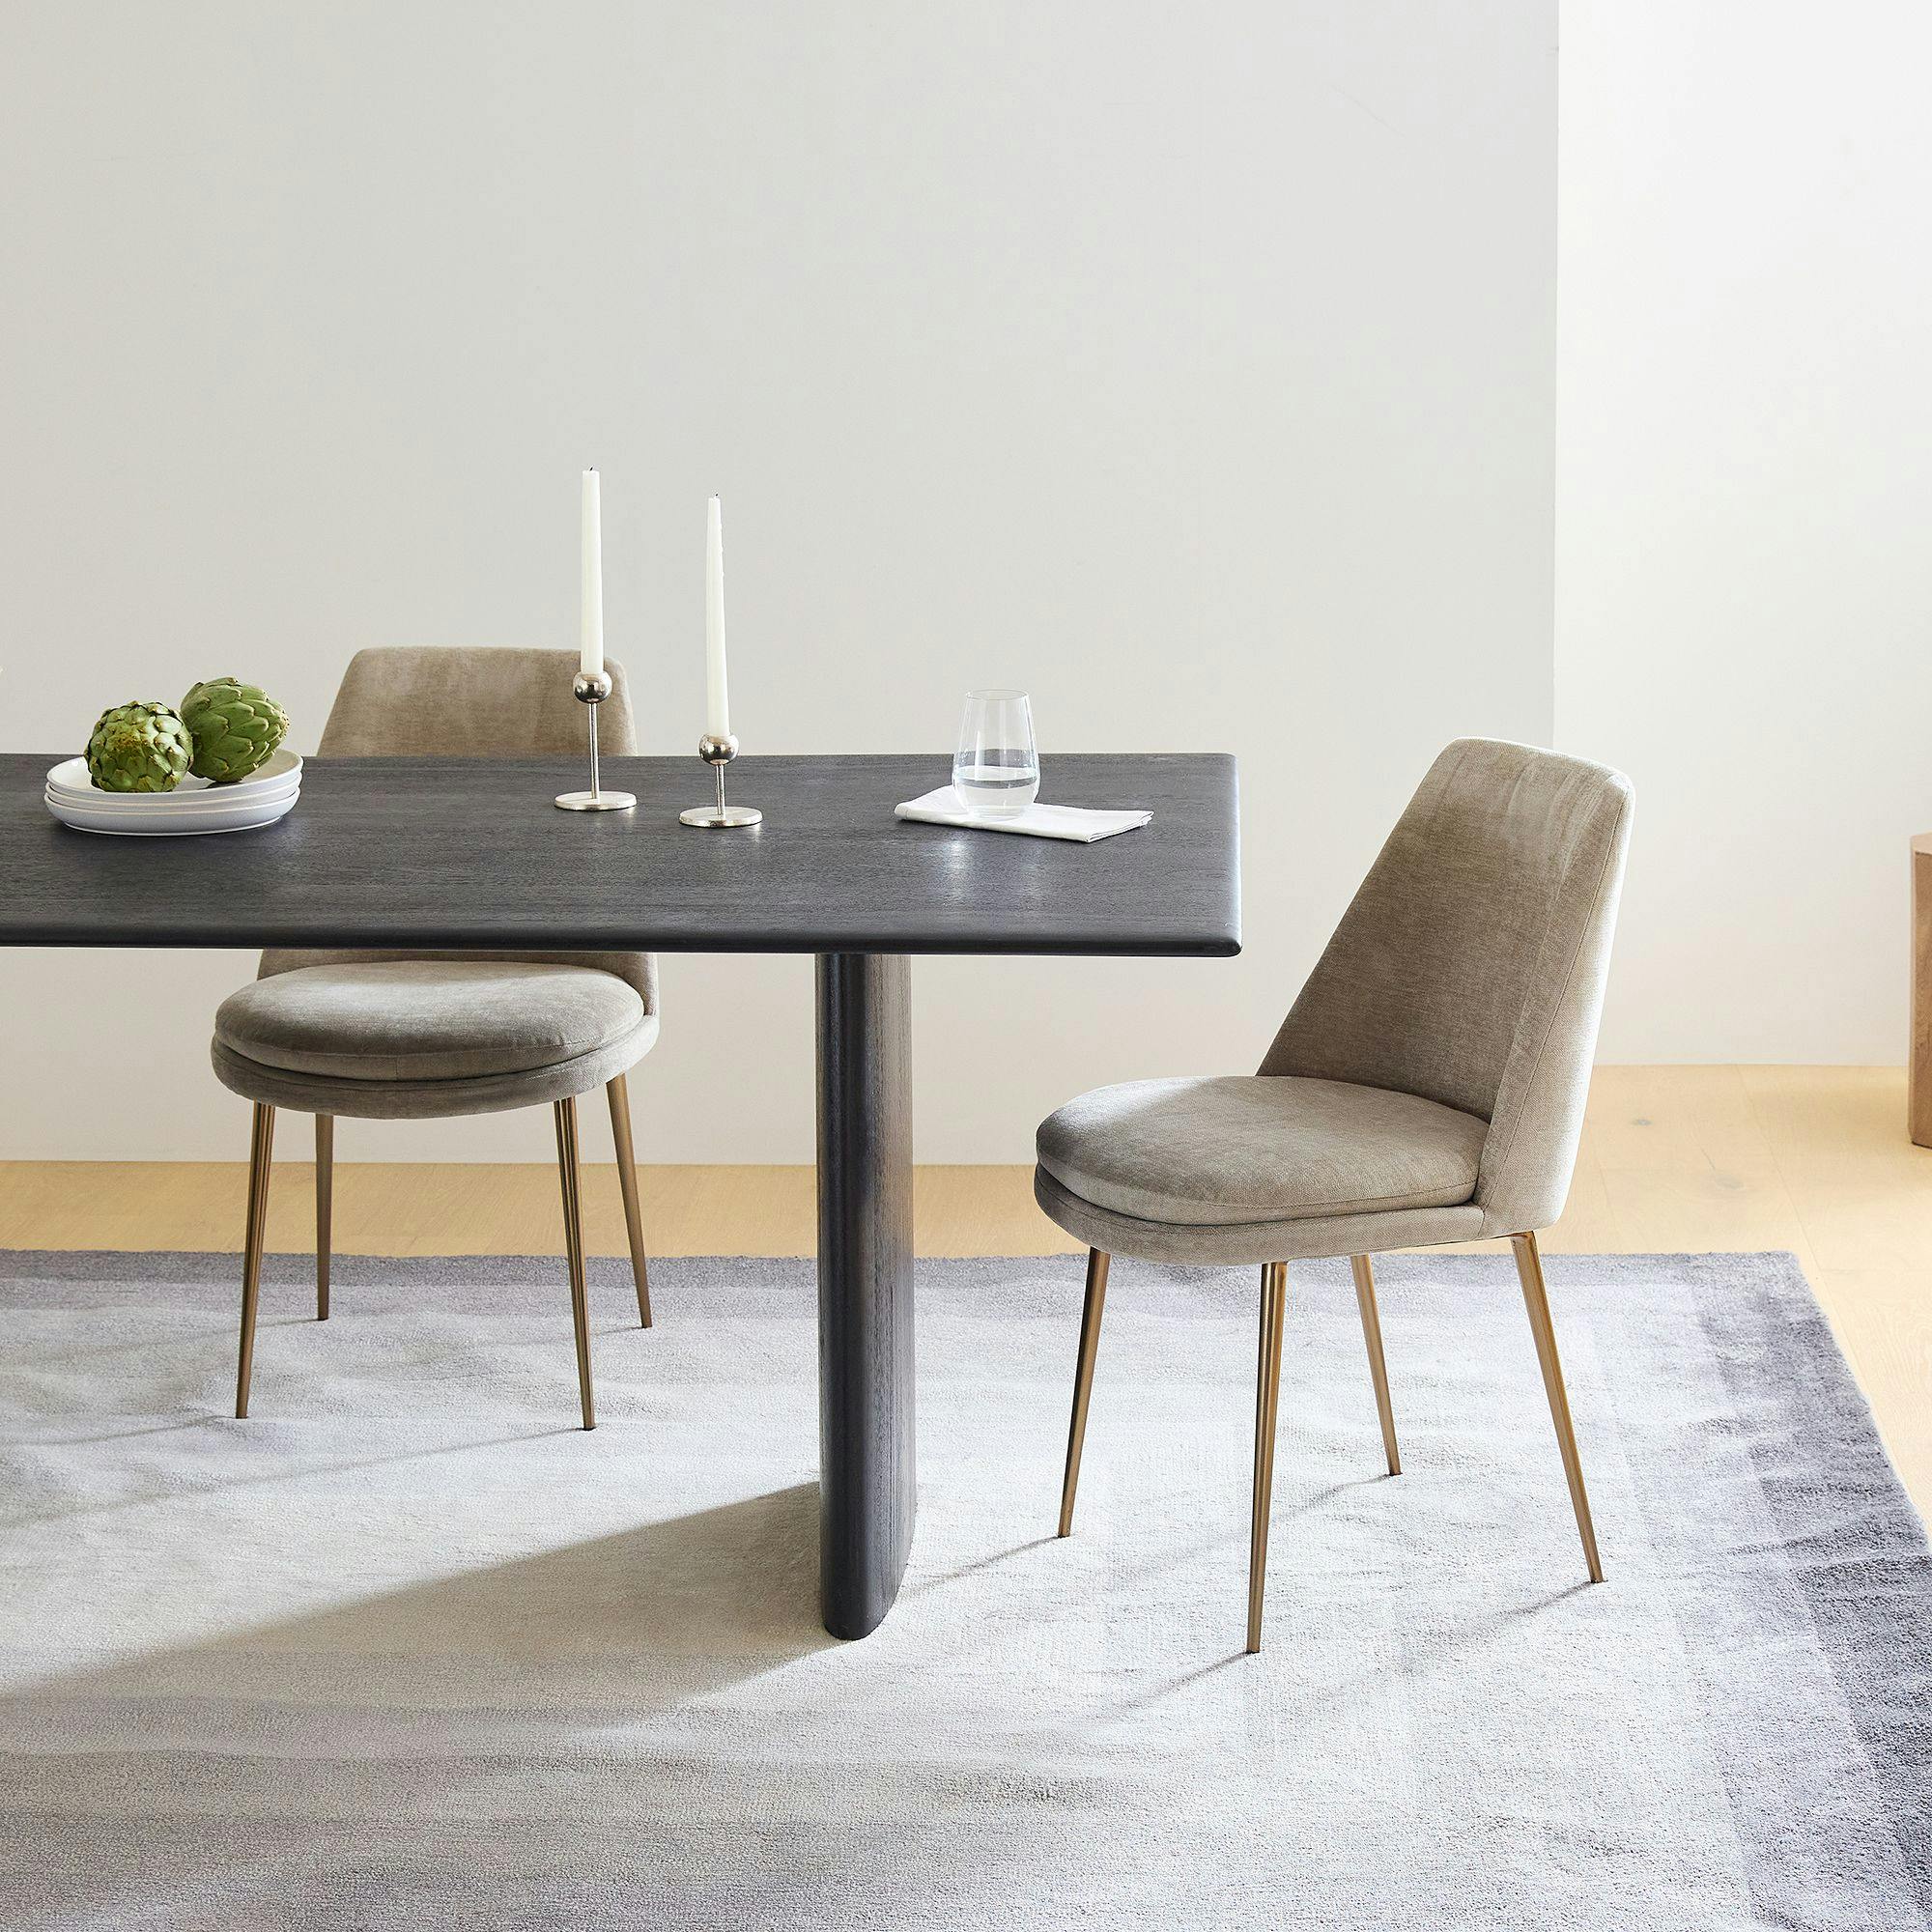 The Finley Low-Back Dining Chairs from West Elm